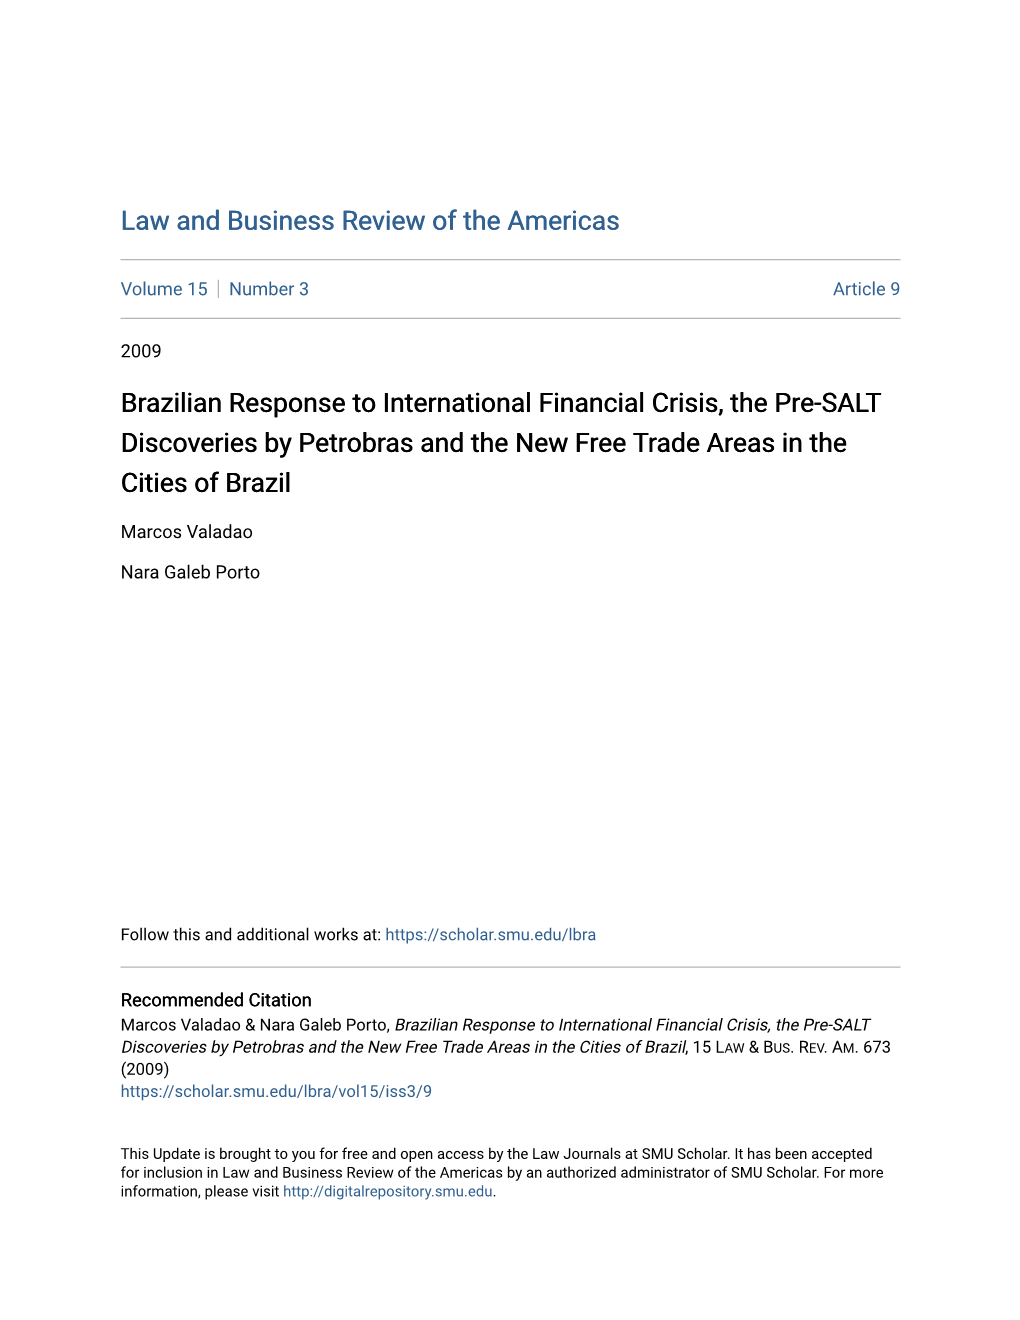 Brazilian Response to International Financial Crisis, the Pre-SALT Discoveries by Petrobras and the New Free Trade Areas in the Cities of Brazil